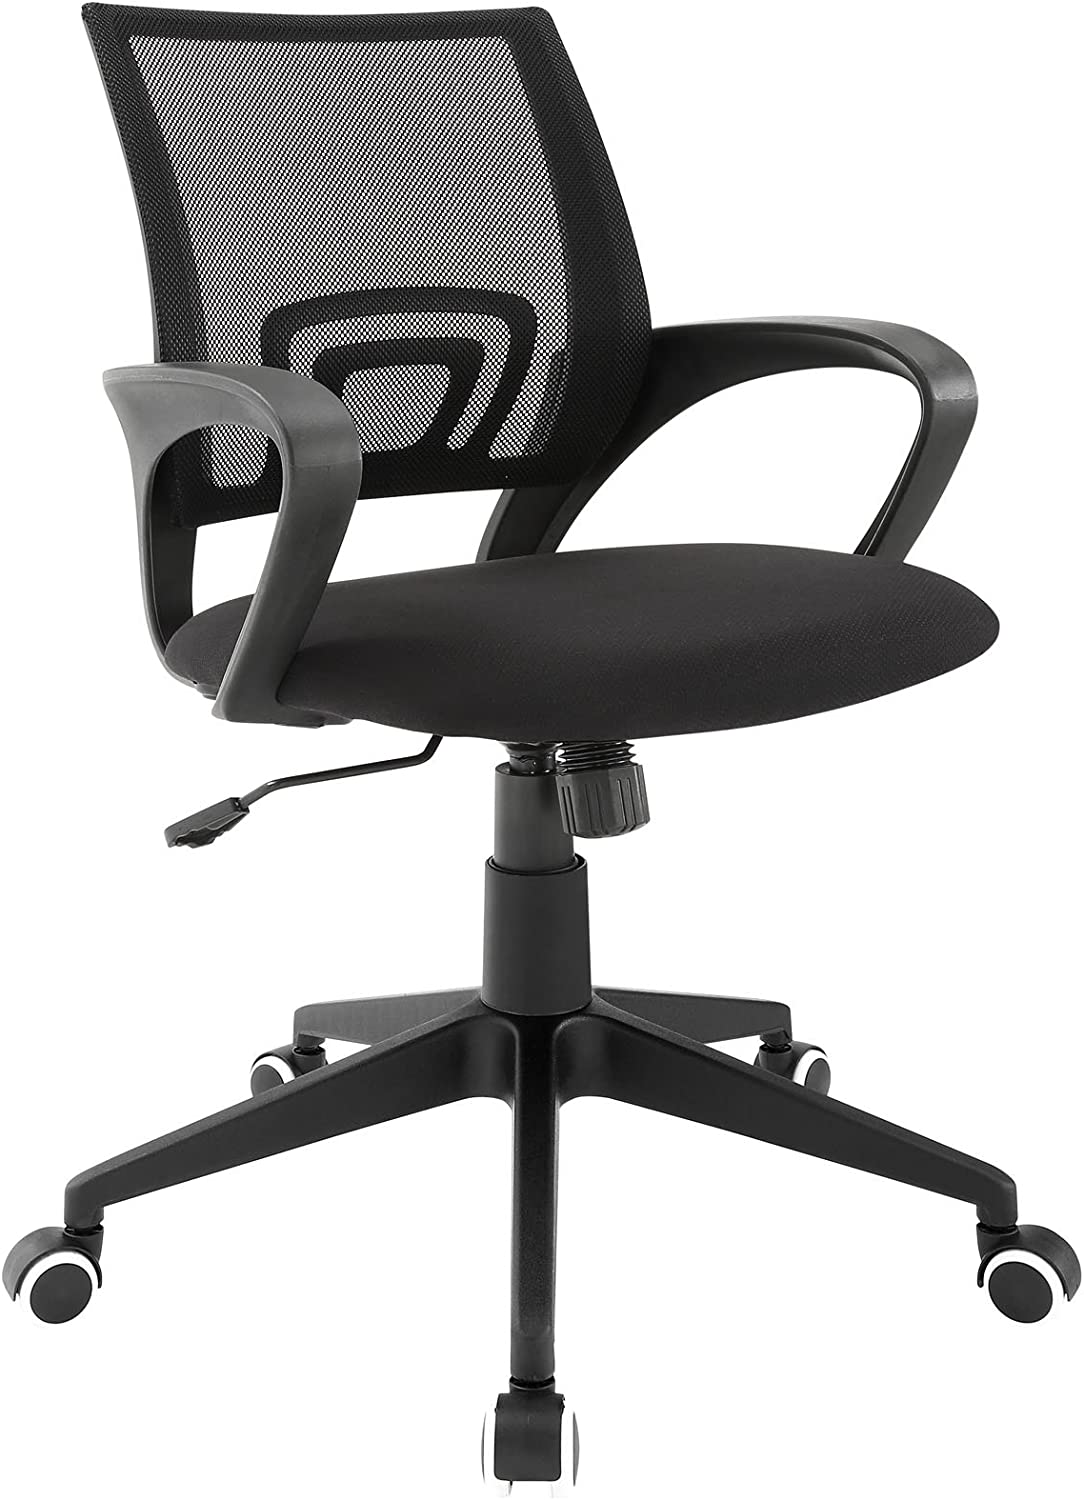 Modway Twilight Office Chair in Black